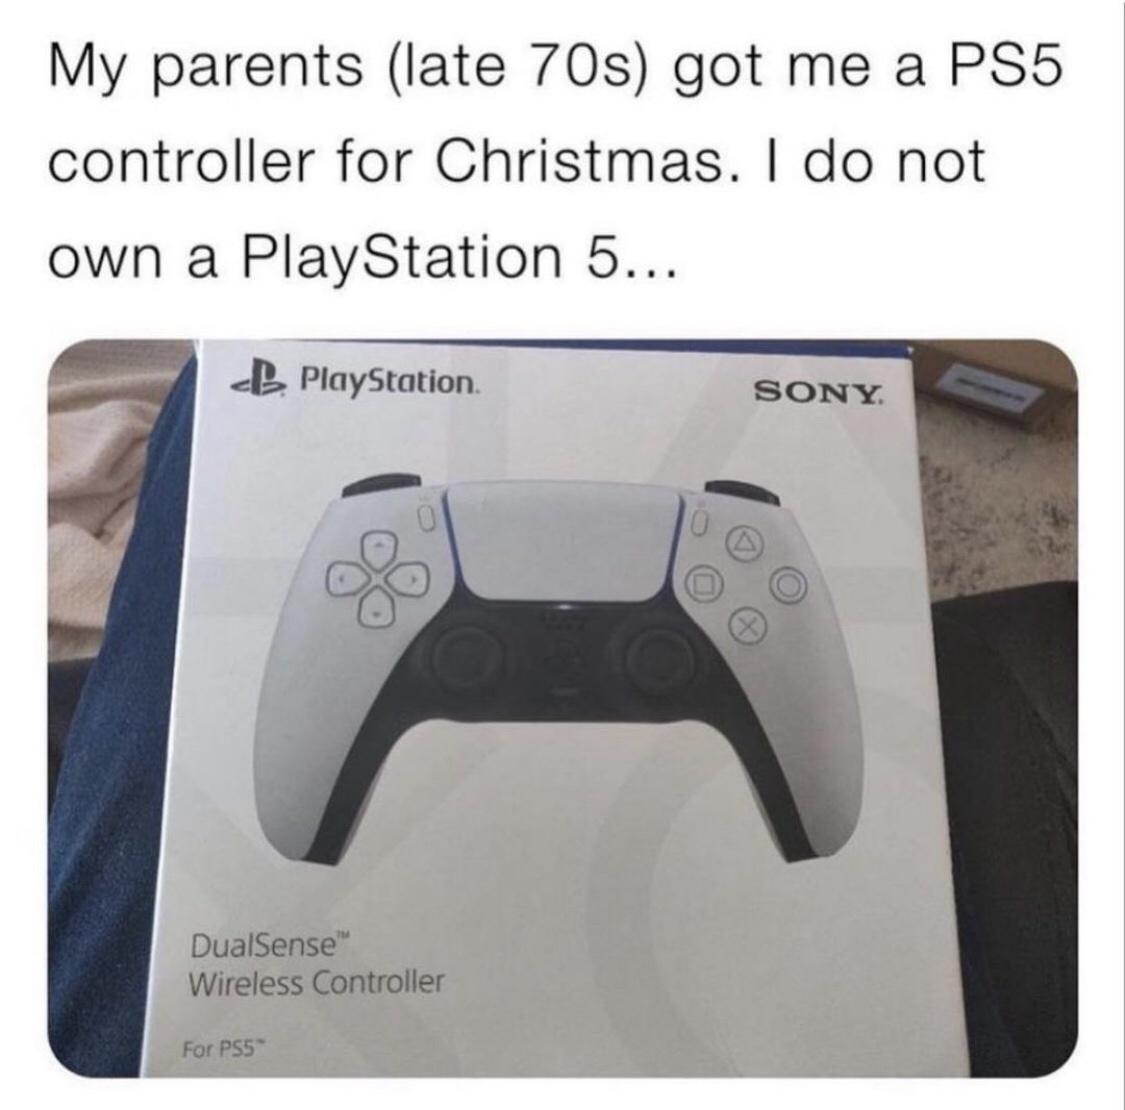 funny gaming memes - PlayStation 5 - My parents late 70s got me a PS5 controller for Christmas. I do not own a PlayStation 5... B. PlayStation Sony DualSense Wireless Controller For PS5